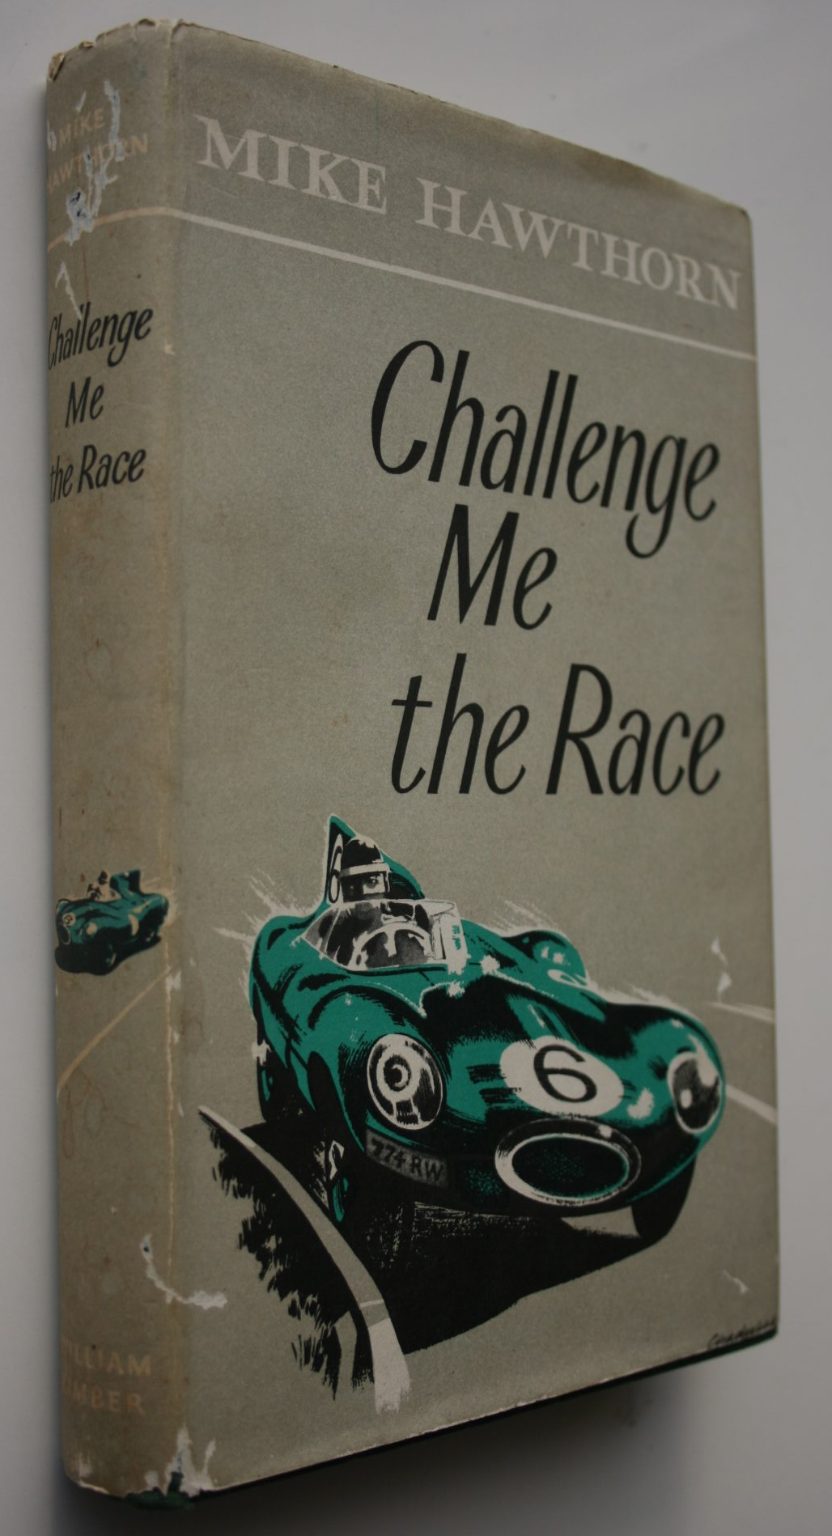 Challenge Me the Race. By Mike Hawthorn. First Edition.